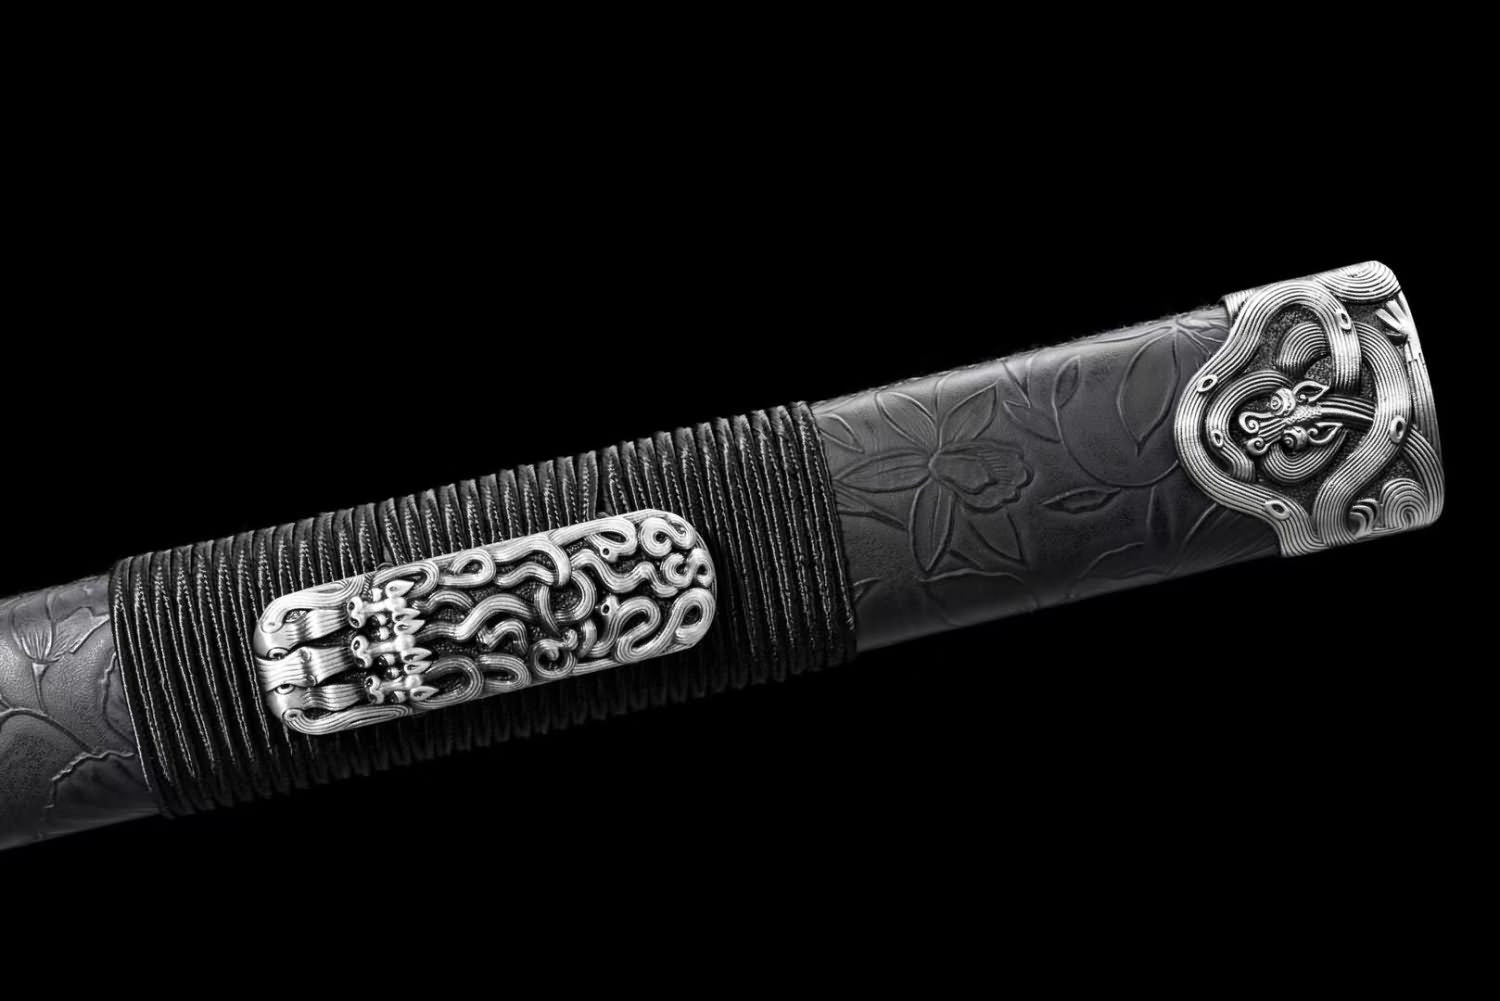 Chinese sword,Han jian High Carbon Steel octahedral Blade,Alloy Fittings,Solid Wood+Fake Leather